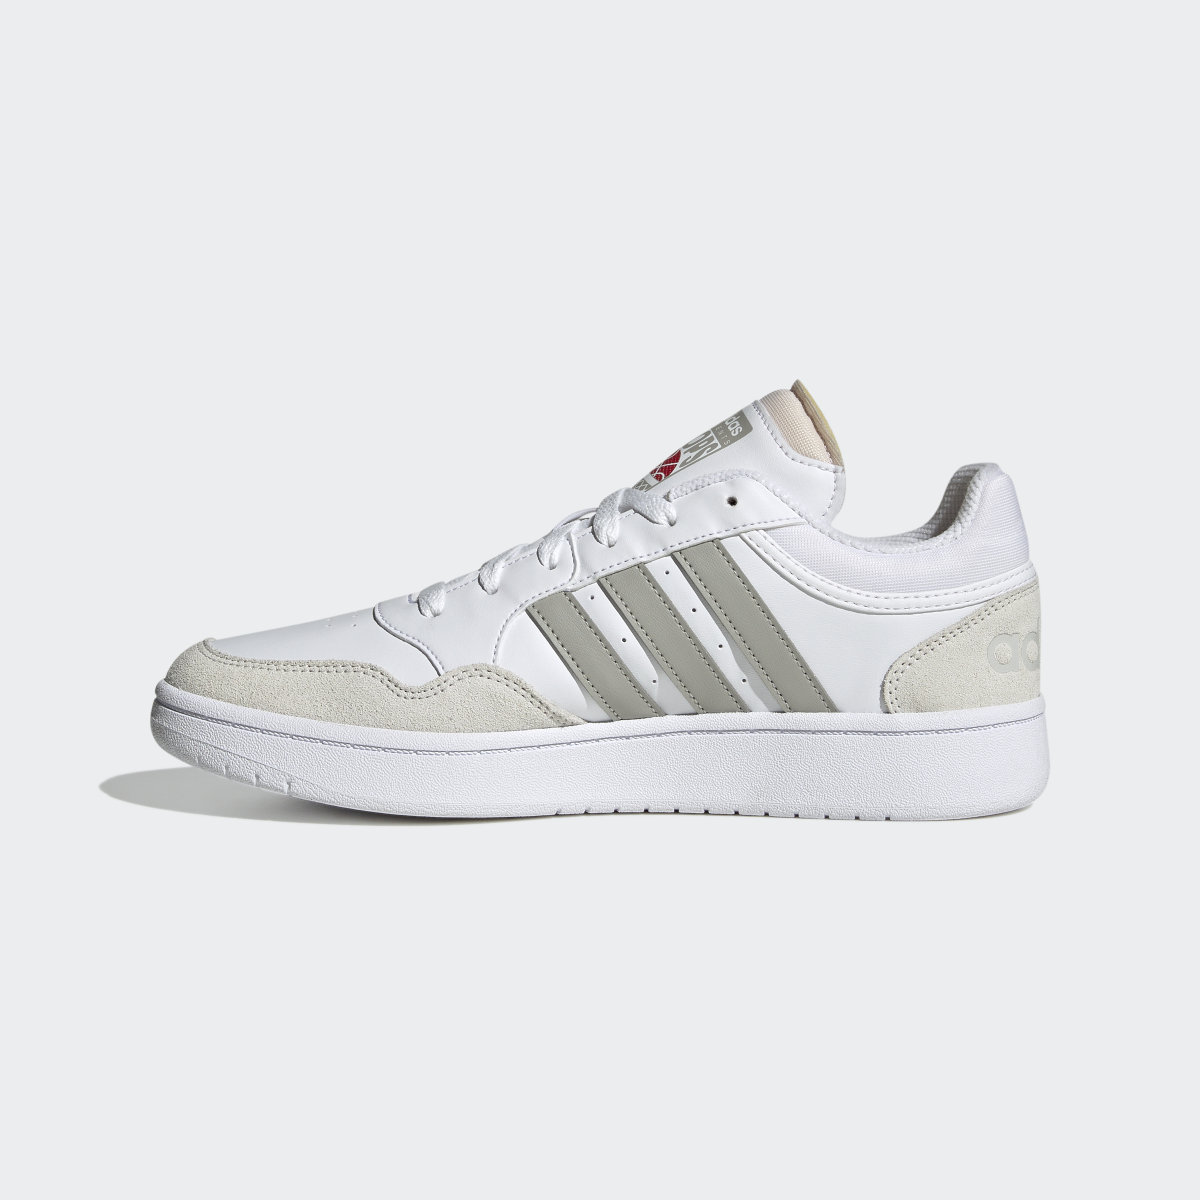 Adidas Hoops 3.0 Lifestyle Basketball Low Classic Vintage Shoes. 7